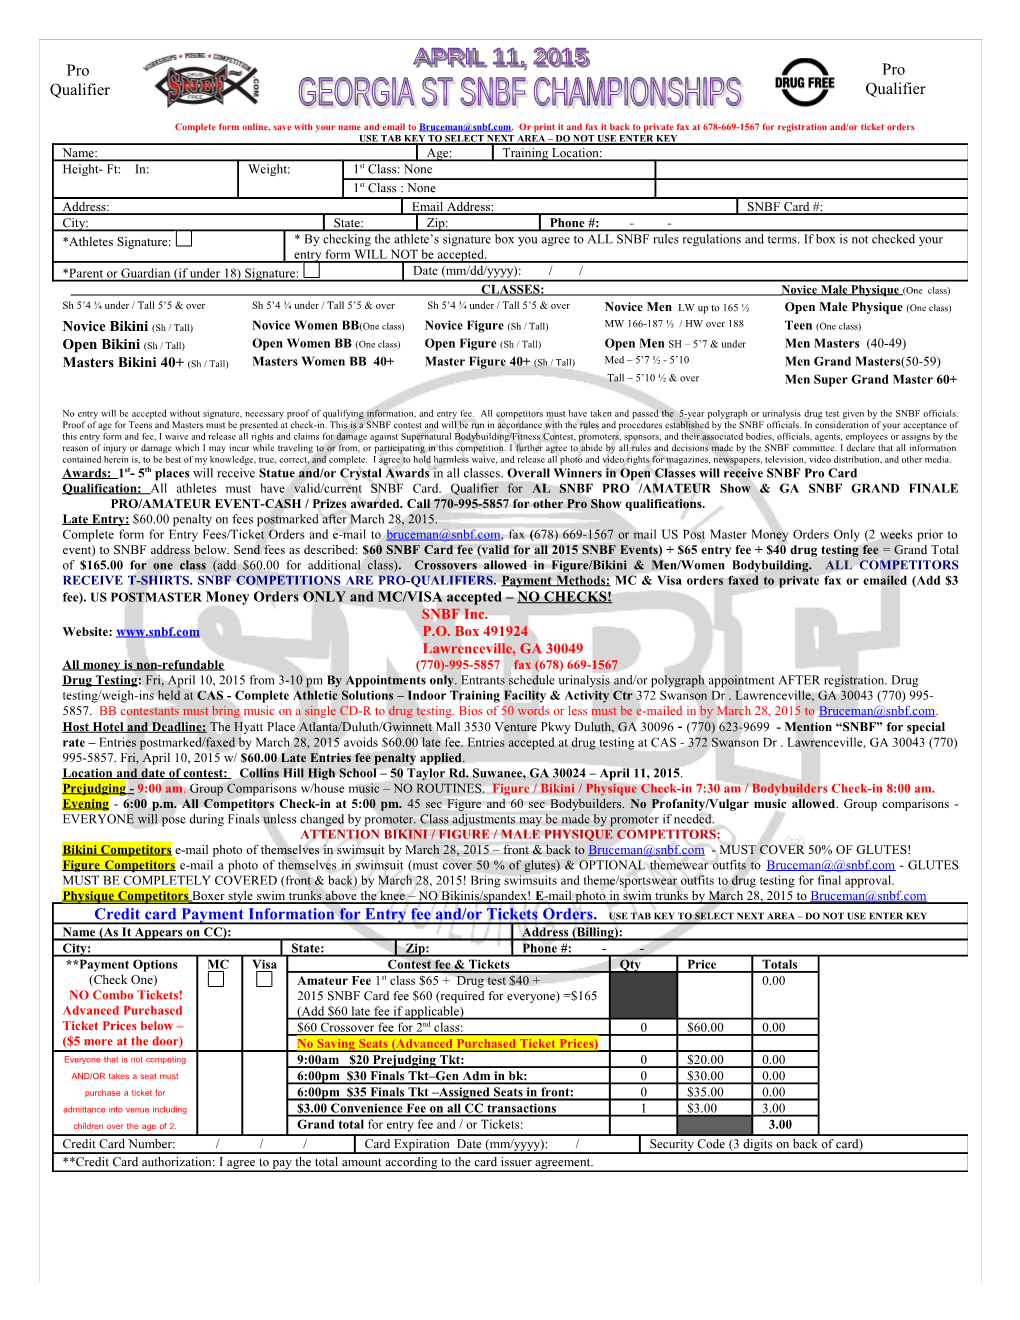 Late Entry:$60.00 Penalty on Fees Postmarked After March 28, 2015